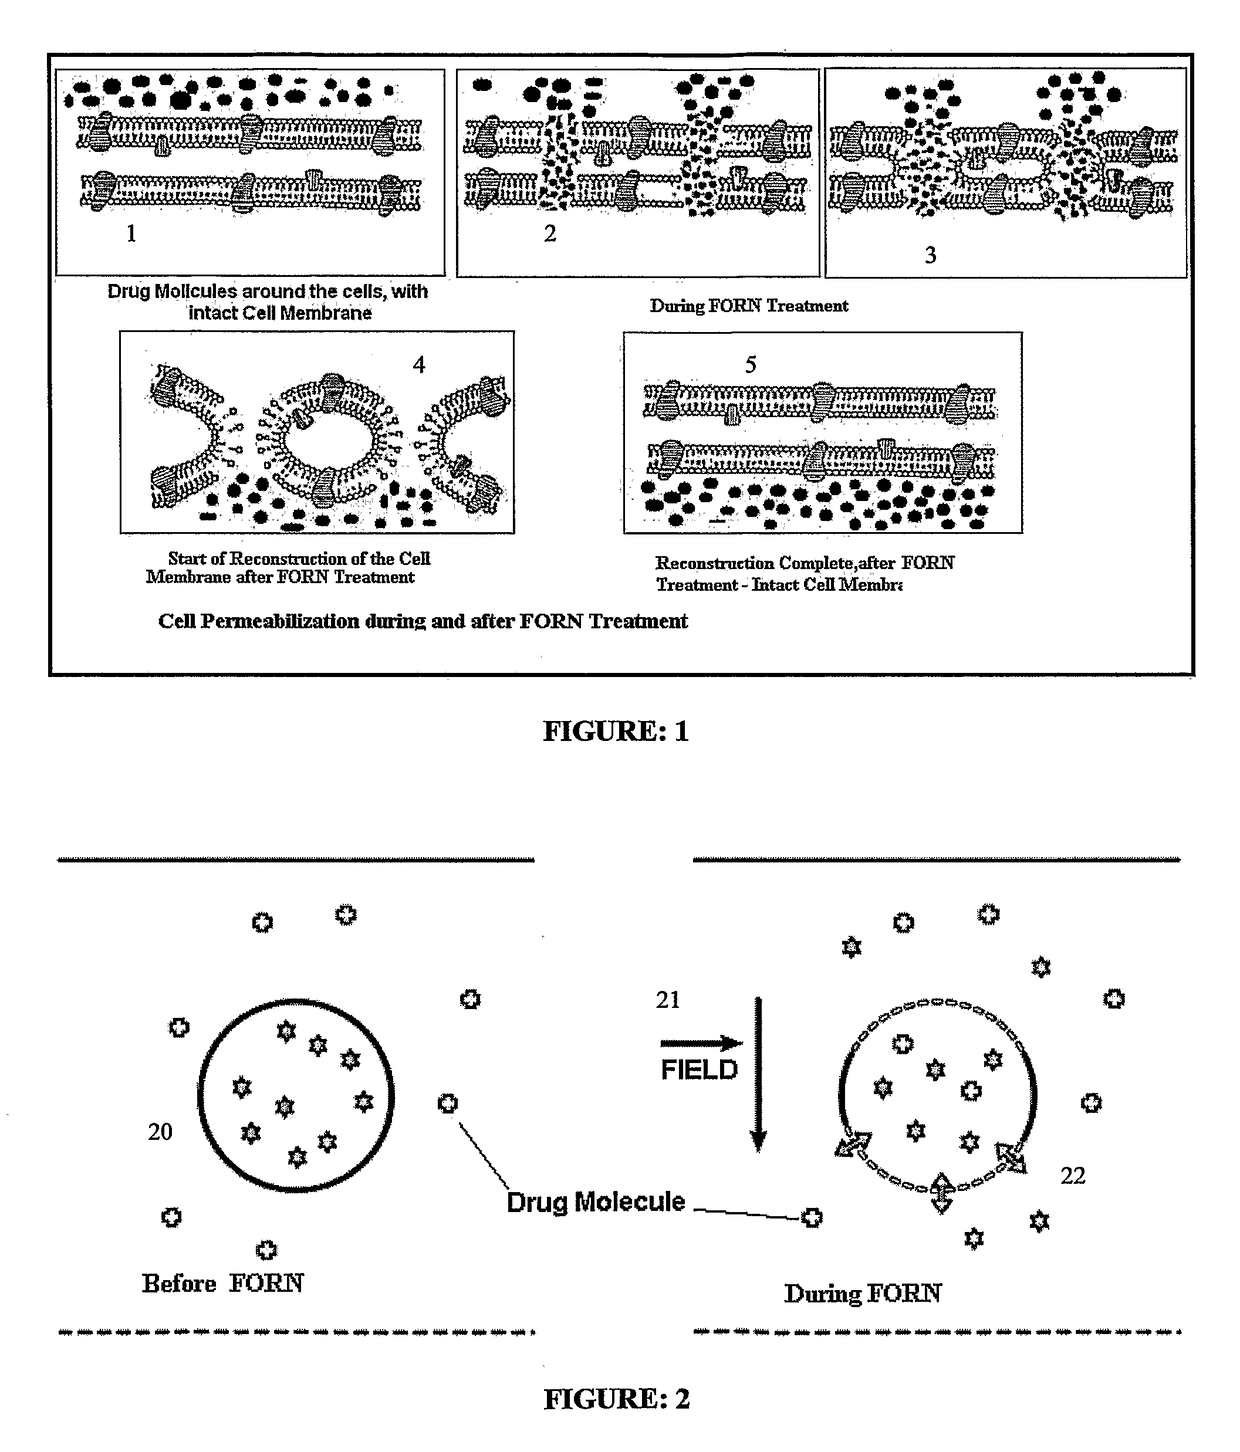 Method of treating cells with drug and radiation according to proton density